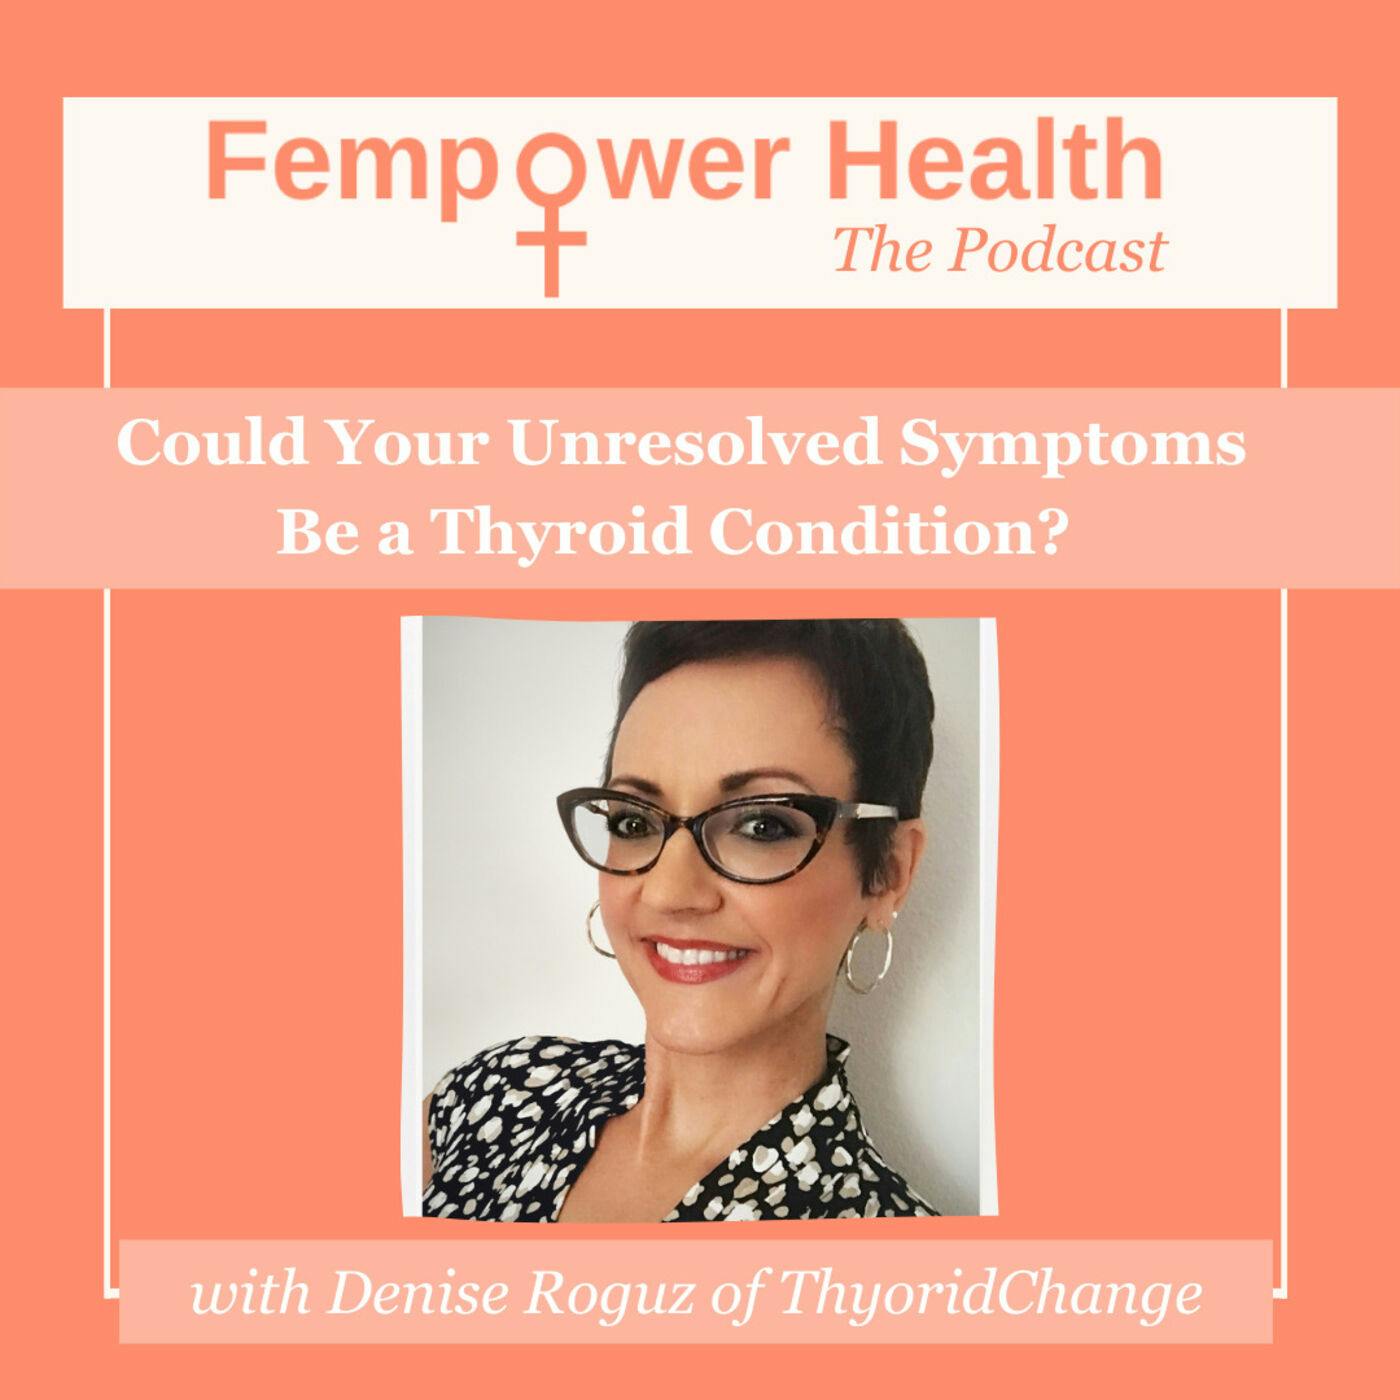 LISTEN AGAIN:  Could Your Unresolved Symptoms Be a Thyroid Condition? | Denise Roguz